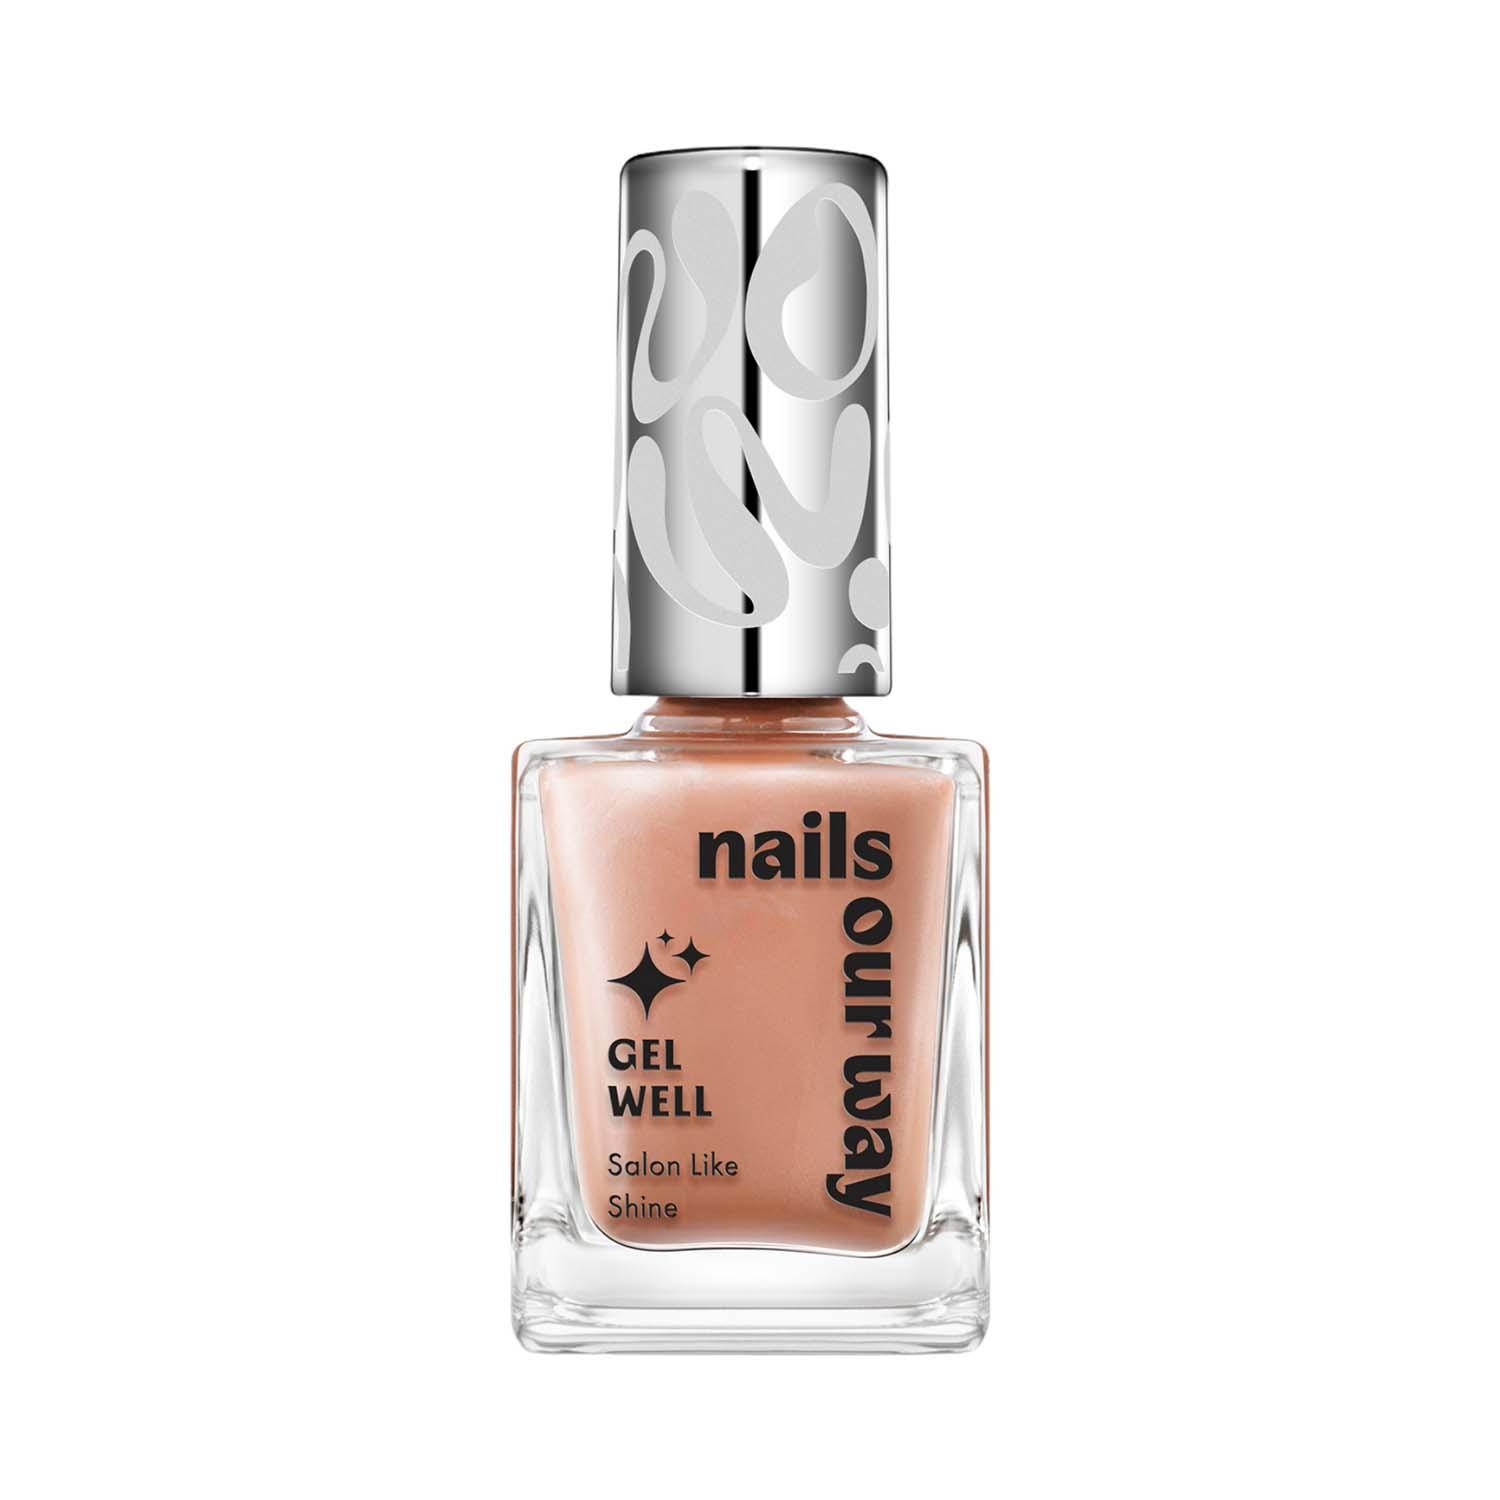 Nails Our Way | Nails Our Way Gel Well Nail Enamel - 303 Glitzy (10 ml)